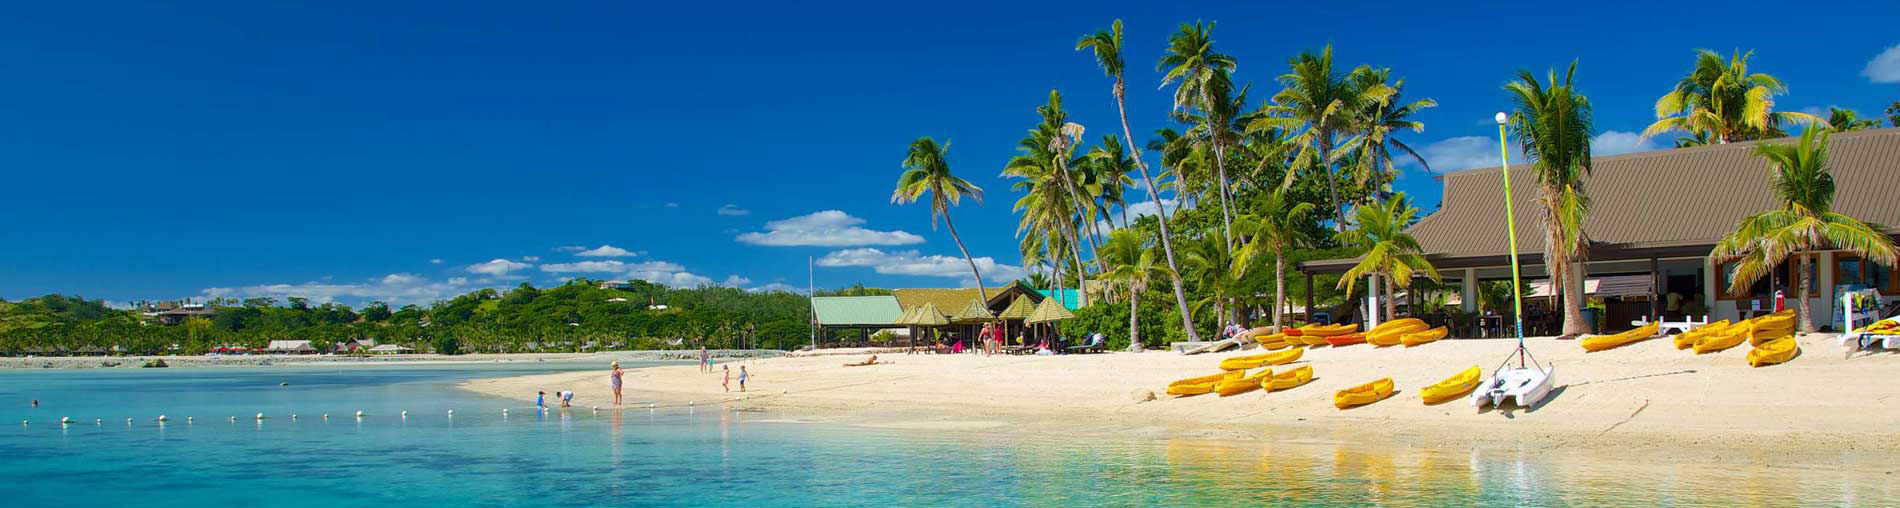 Best Time To Visit Fiji Island